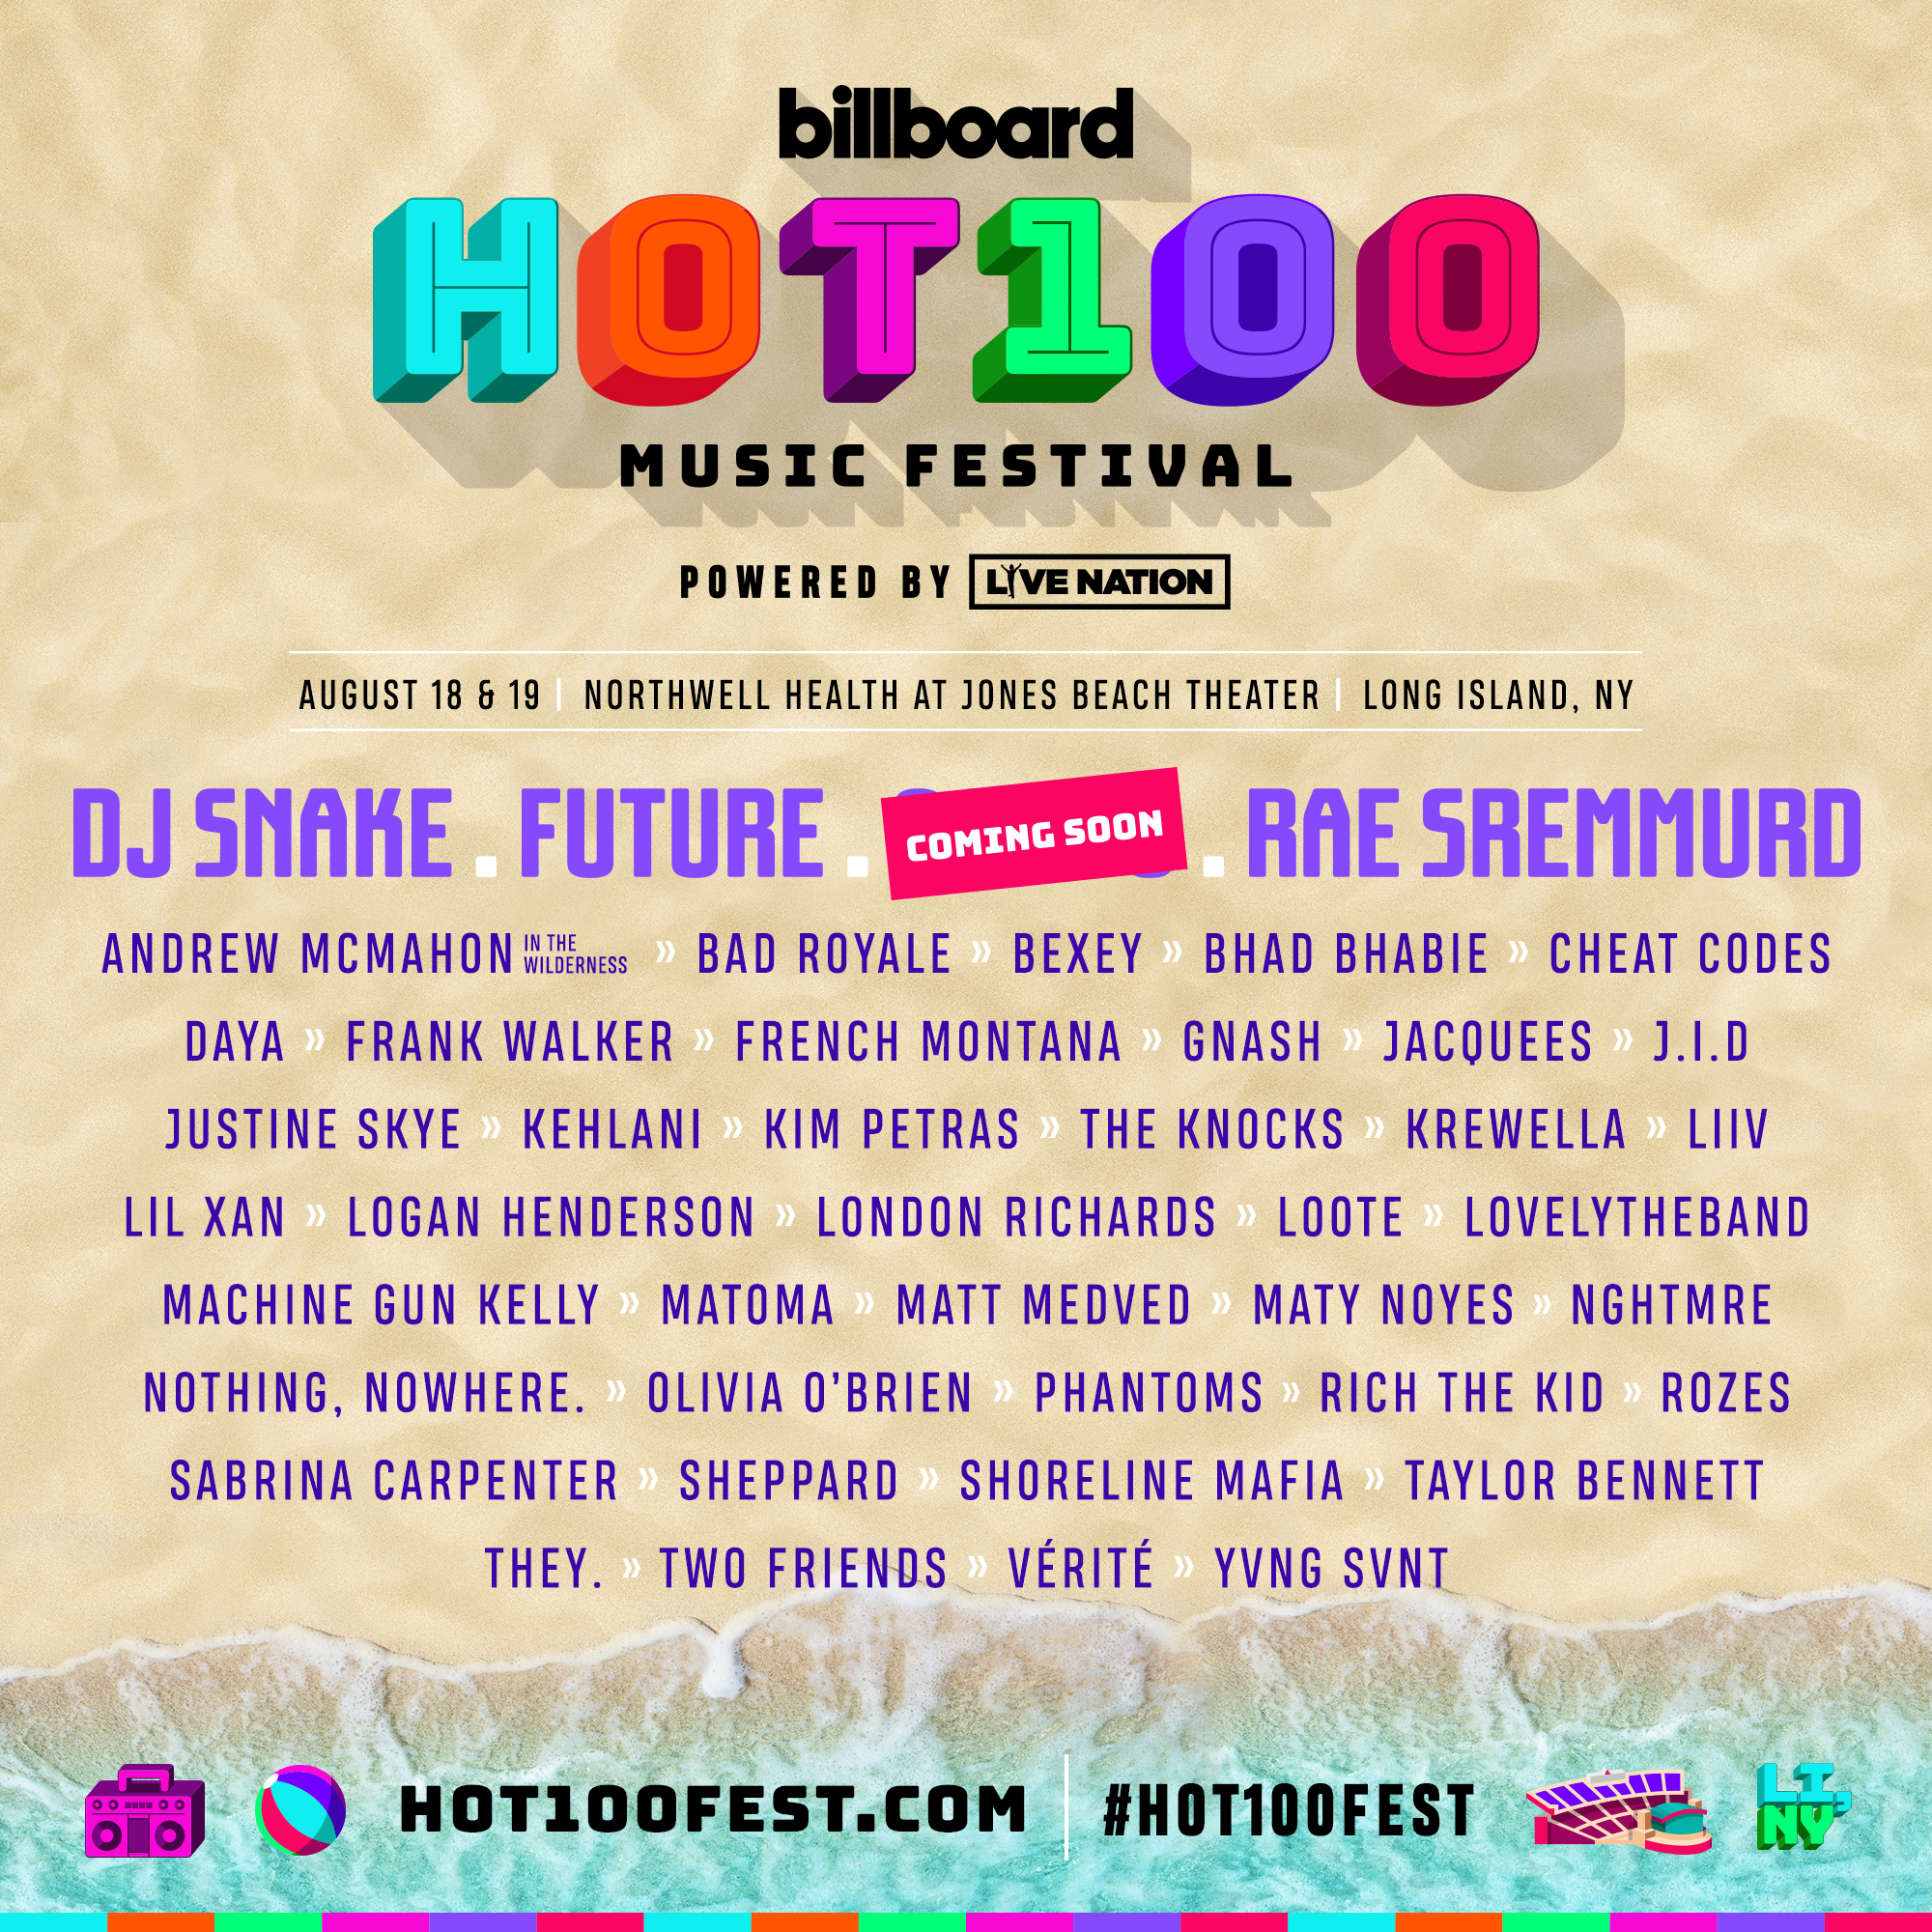 Future, Rae Sremmurd, and Kehlani to Perform at Billboard Hot 100 Fest: See the Lineup